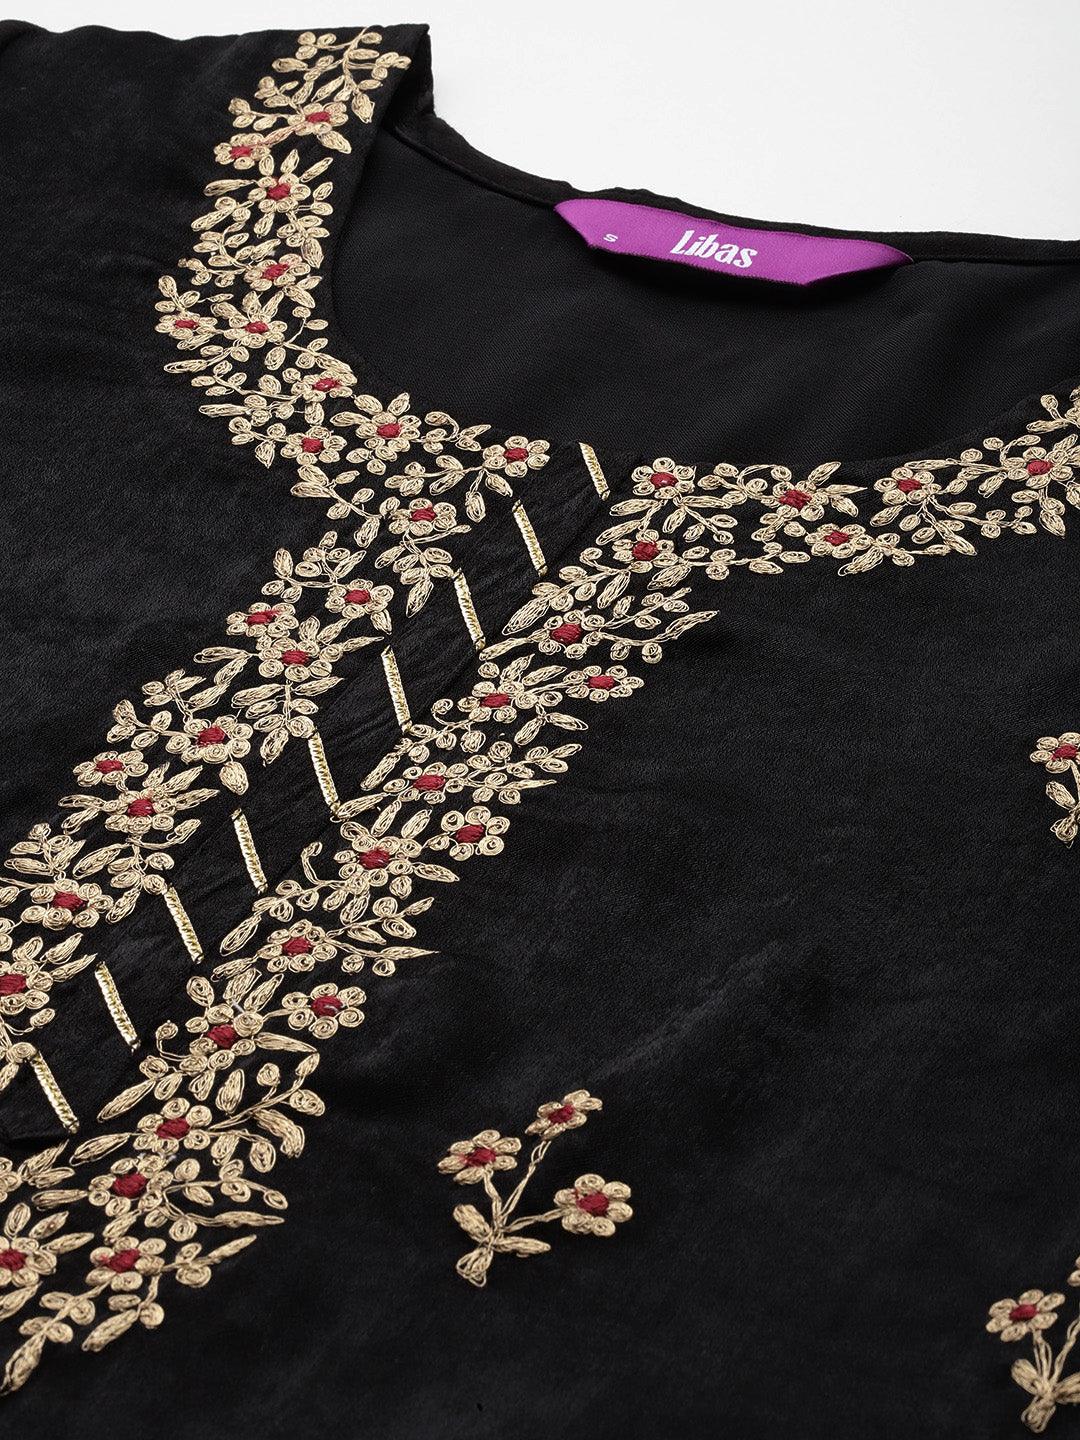 Black Embroidered Polyester Straight Kurta With Trousers - Libas